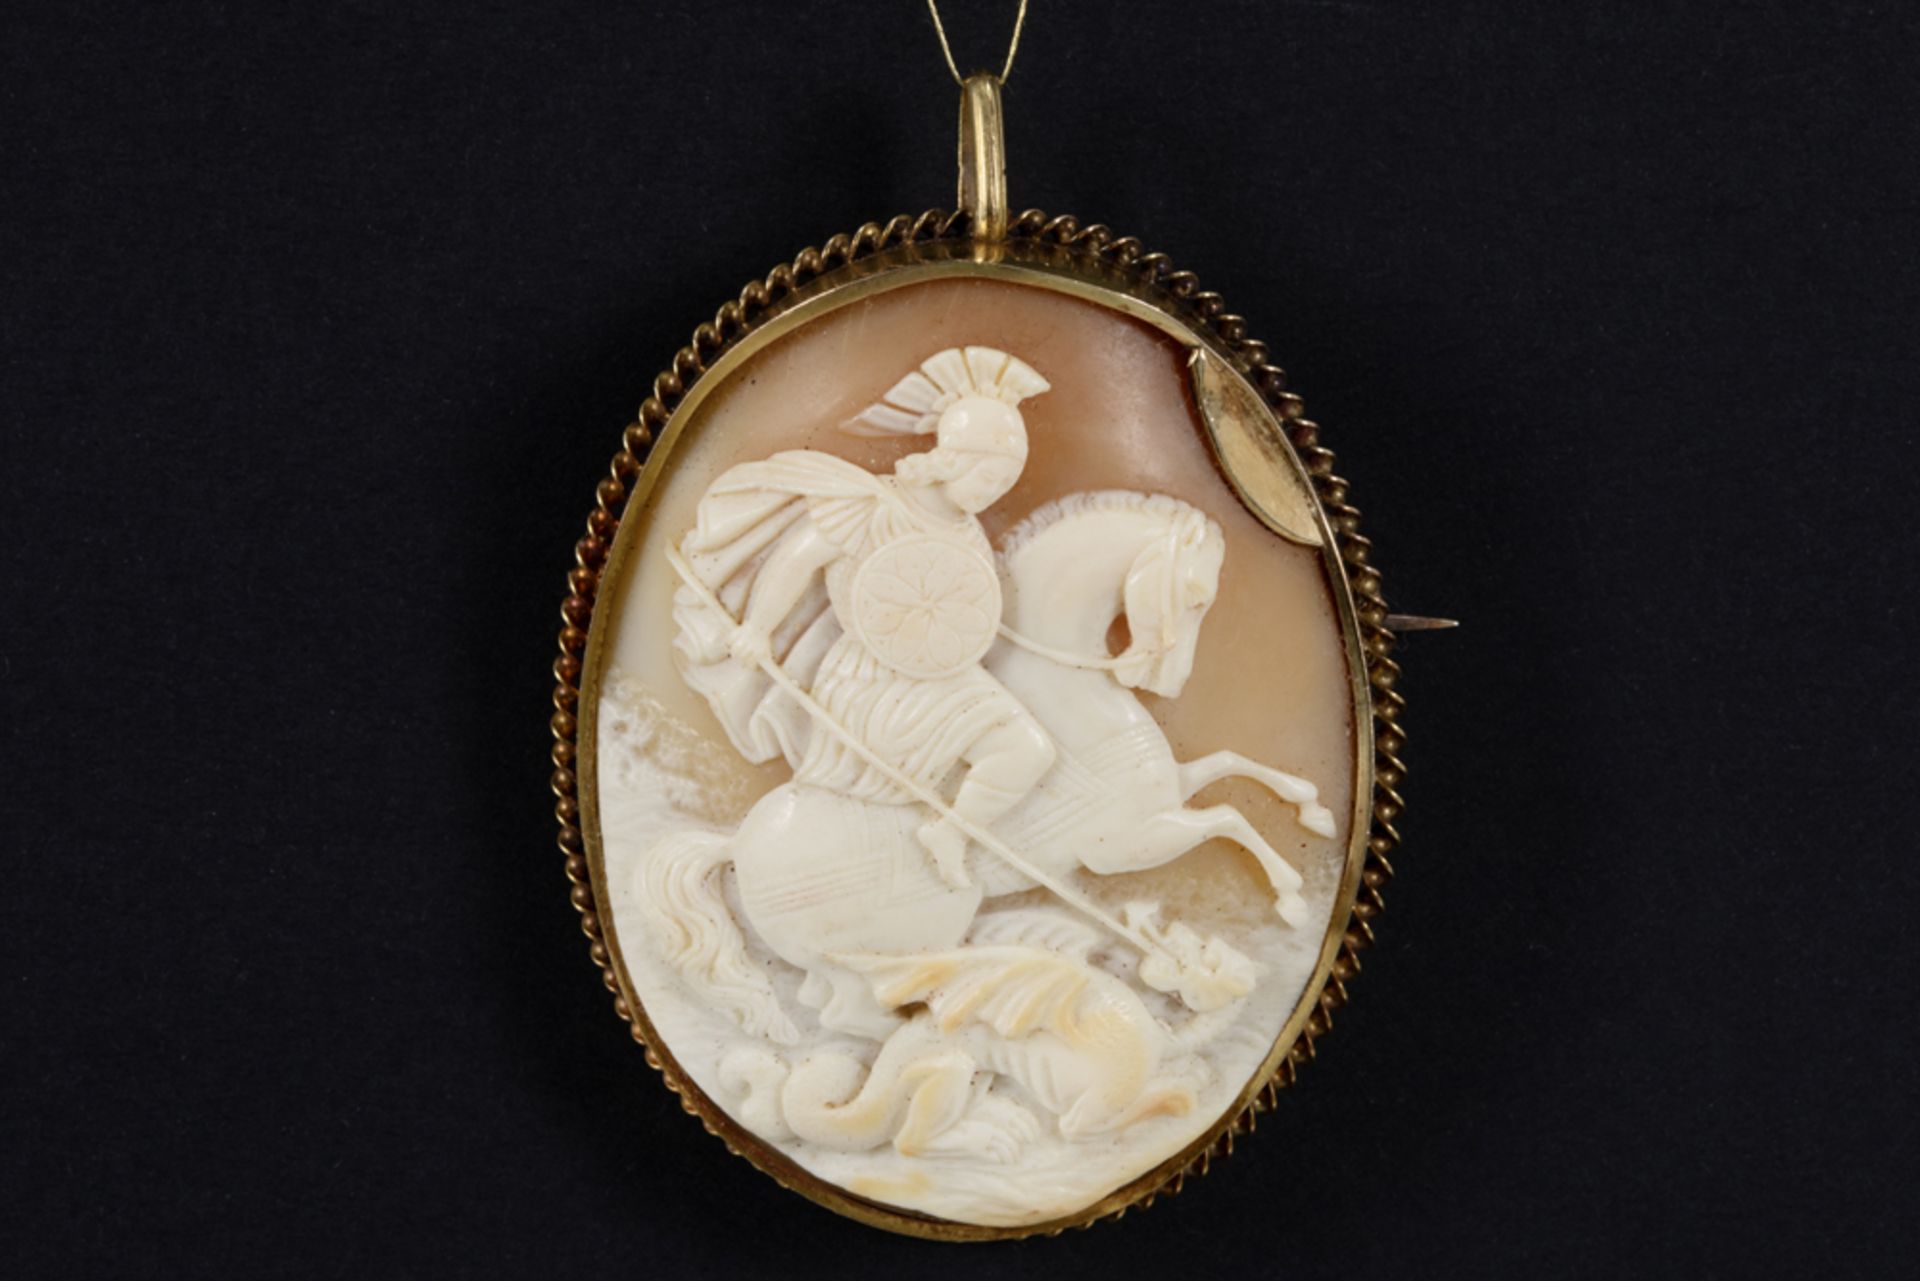 'antique' brooch with a cameo with a finely cut "St-George and dragon" depiction, set in yellow gold